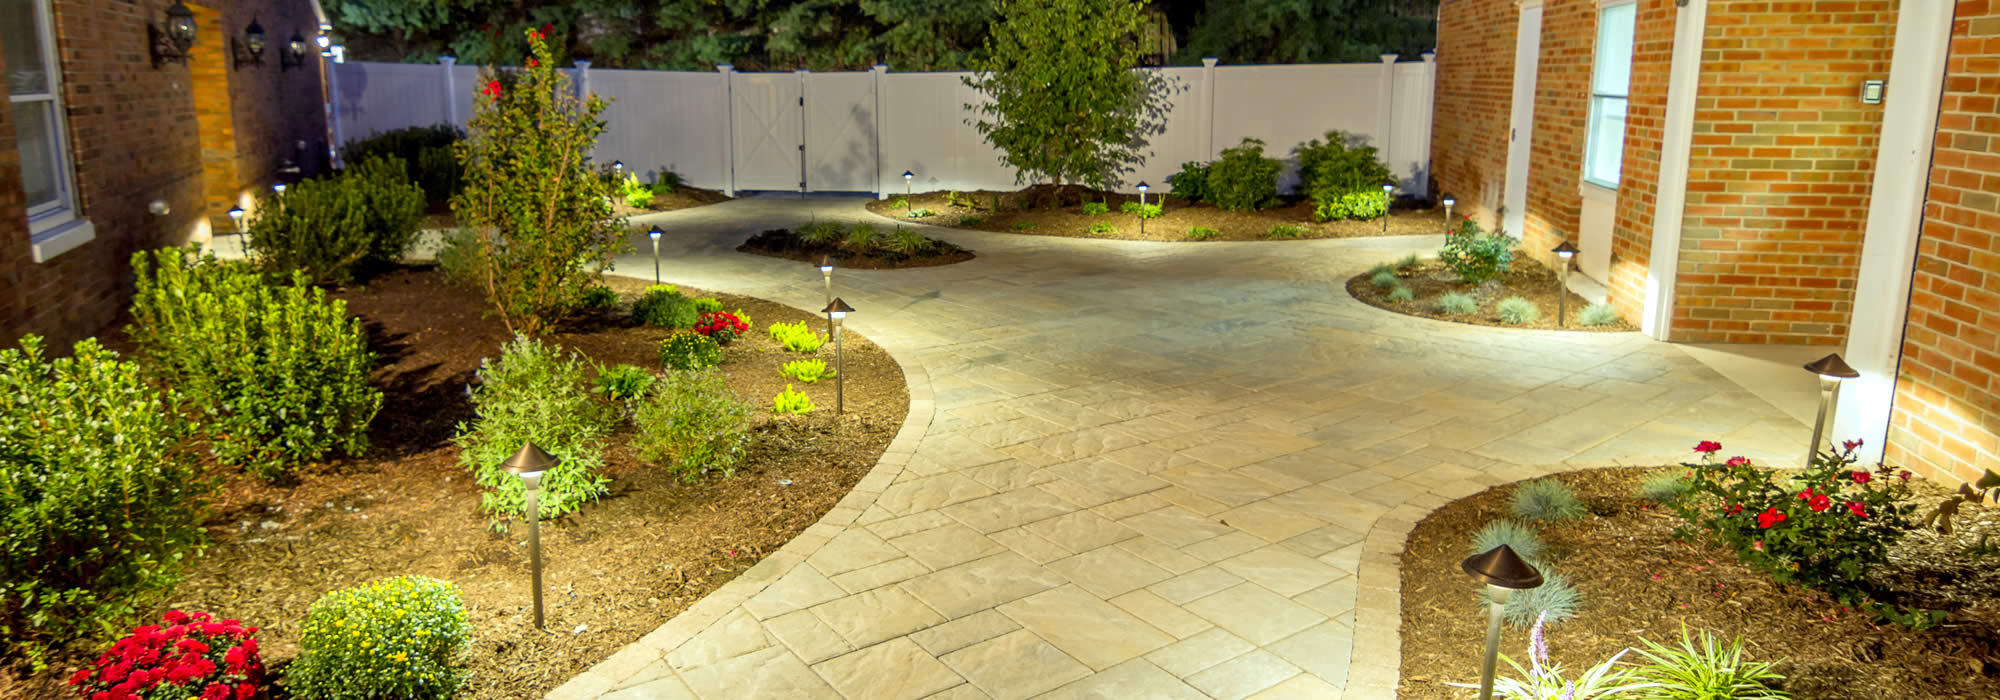 Landscaping Services in Sun Prairie